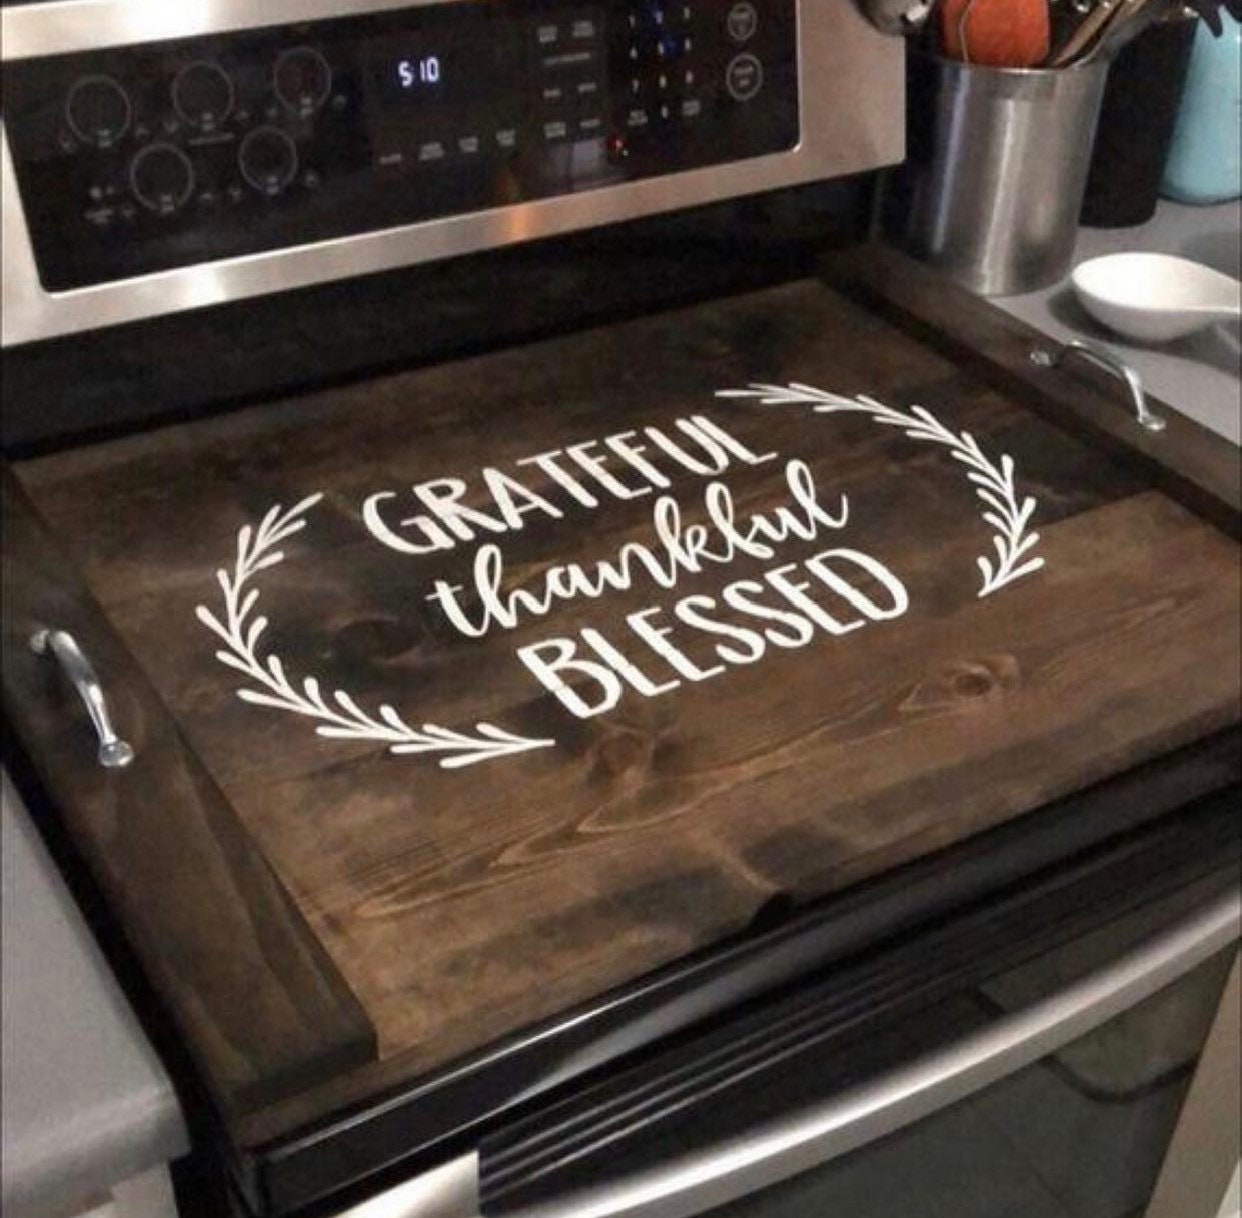 Grateful Thankful And Blessed Wood Engraved Noodle Board - Stove Cover -  Sink Cover - With Handles - Gas or Electric Stove NB-G2